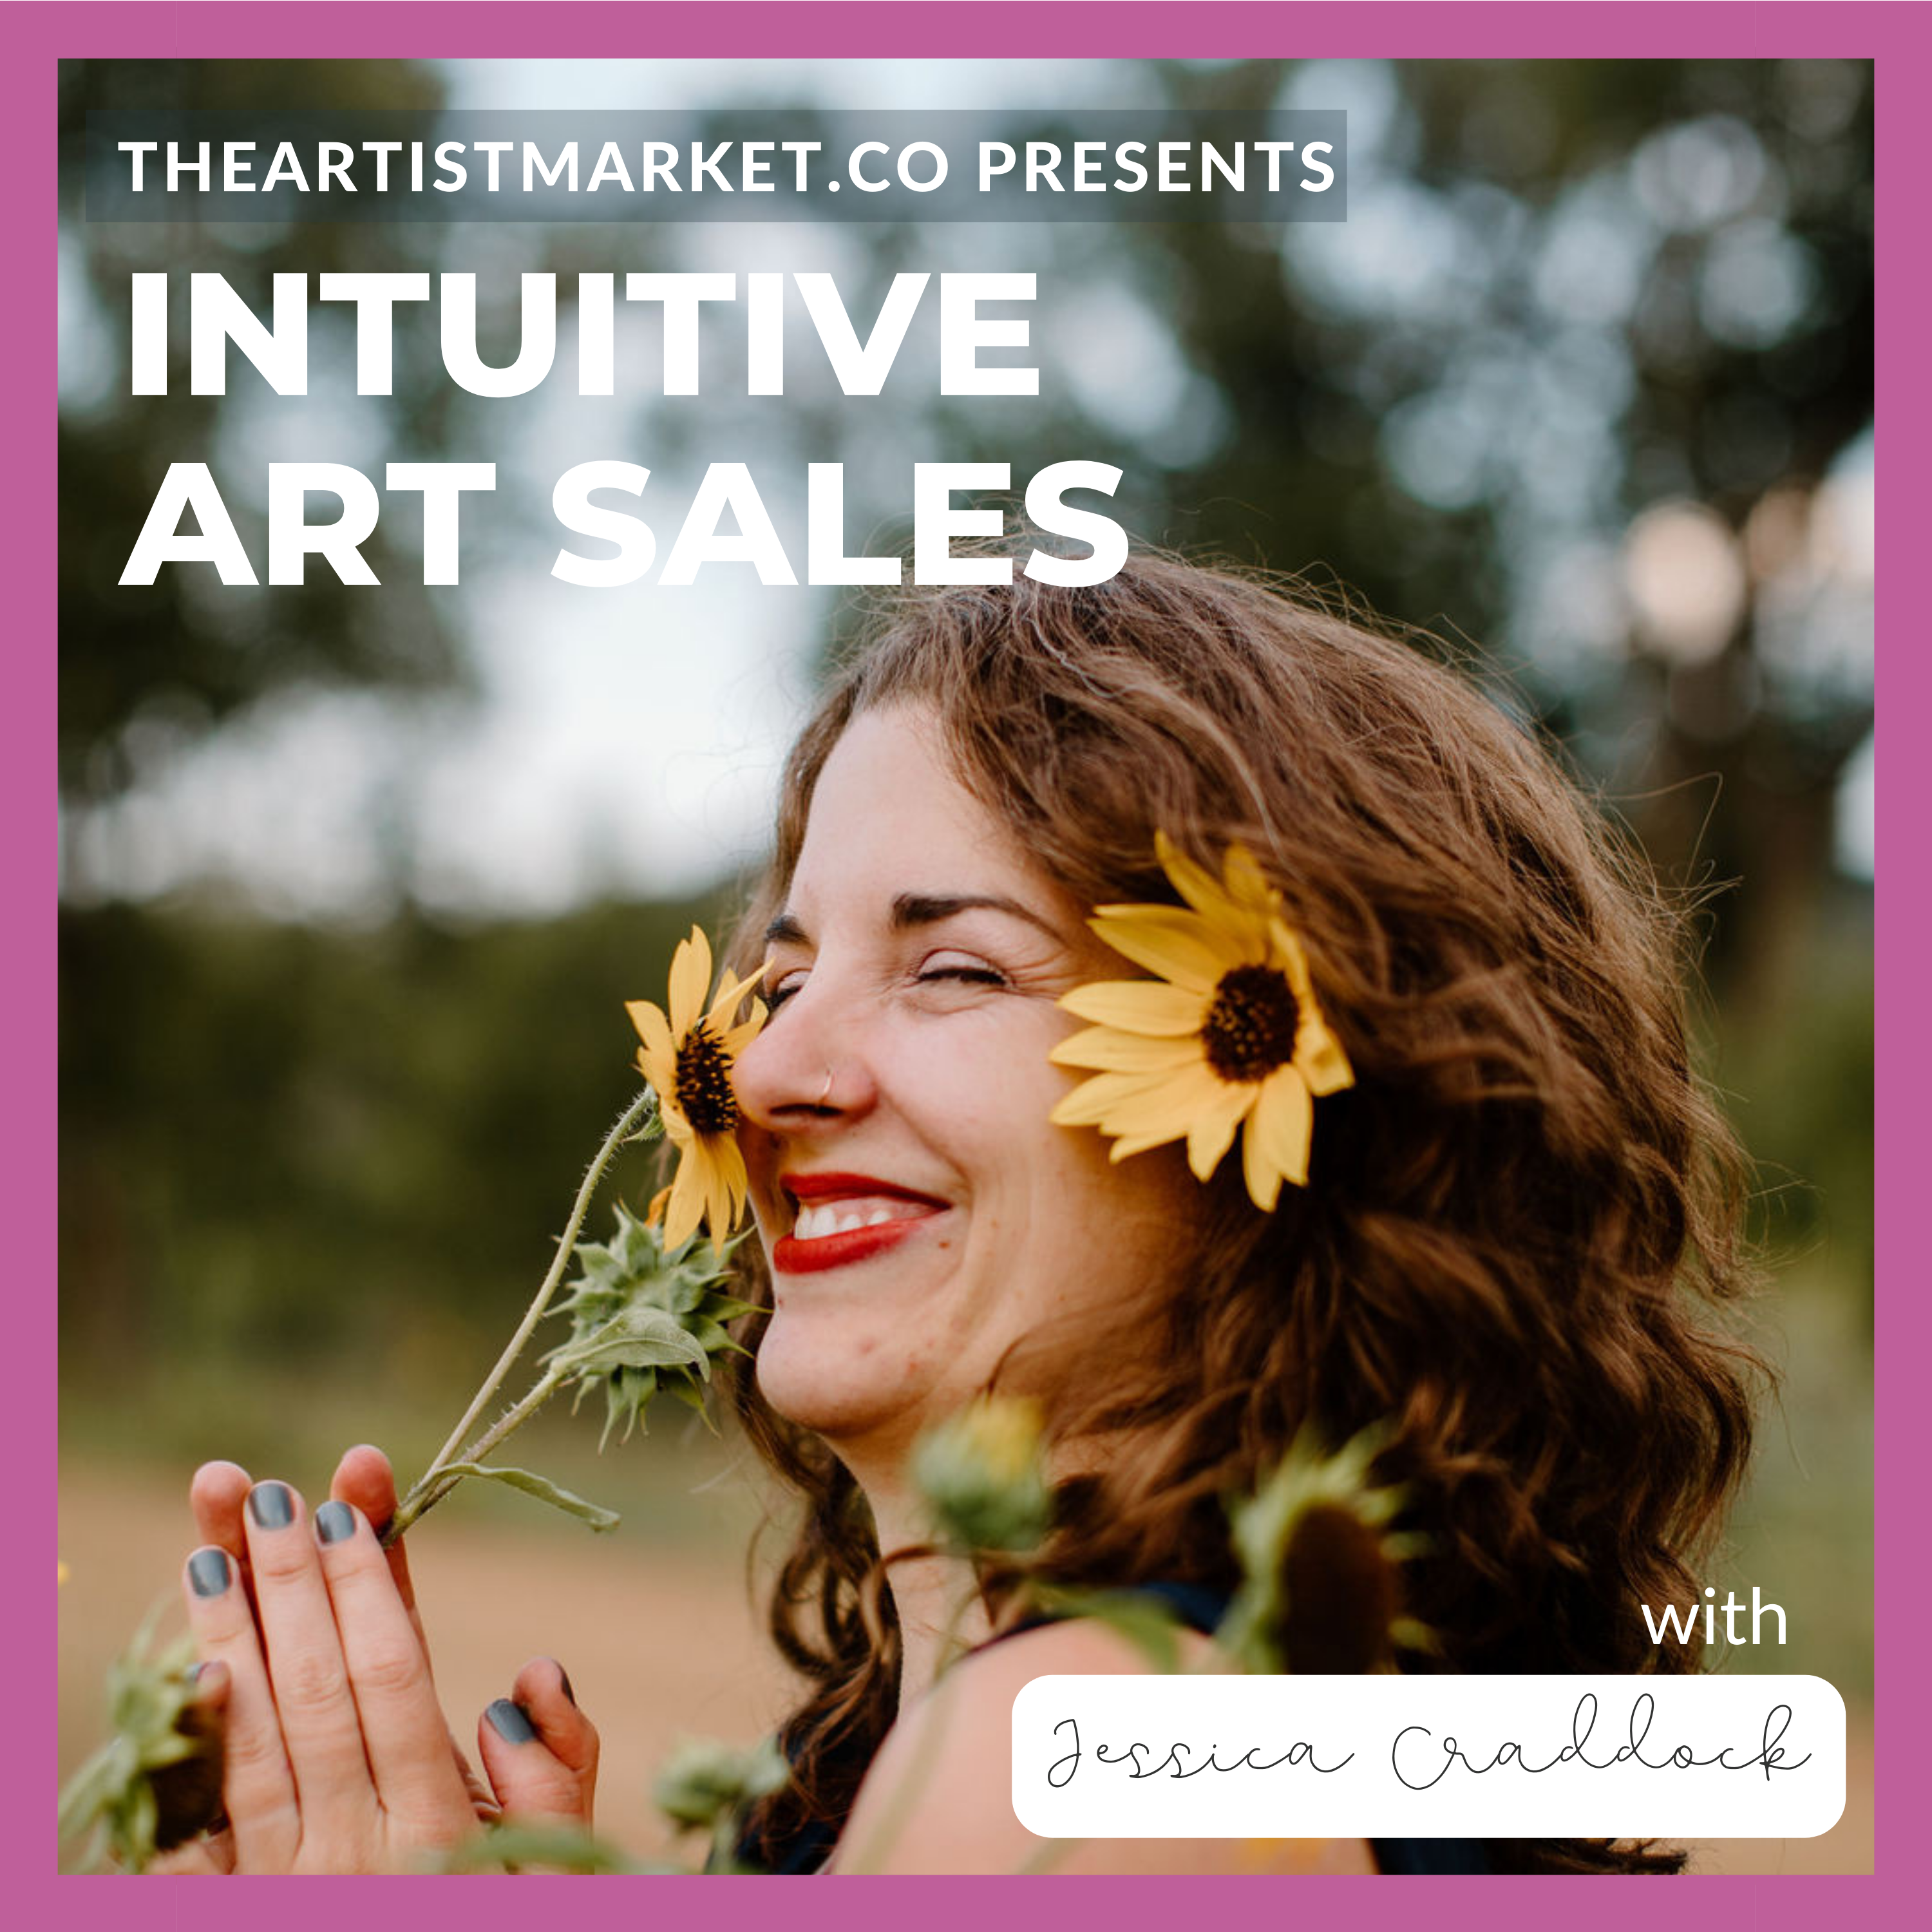 "What marketing strategy should I use to sell my limited edition prints?" - Camilla Howalt E54